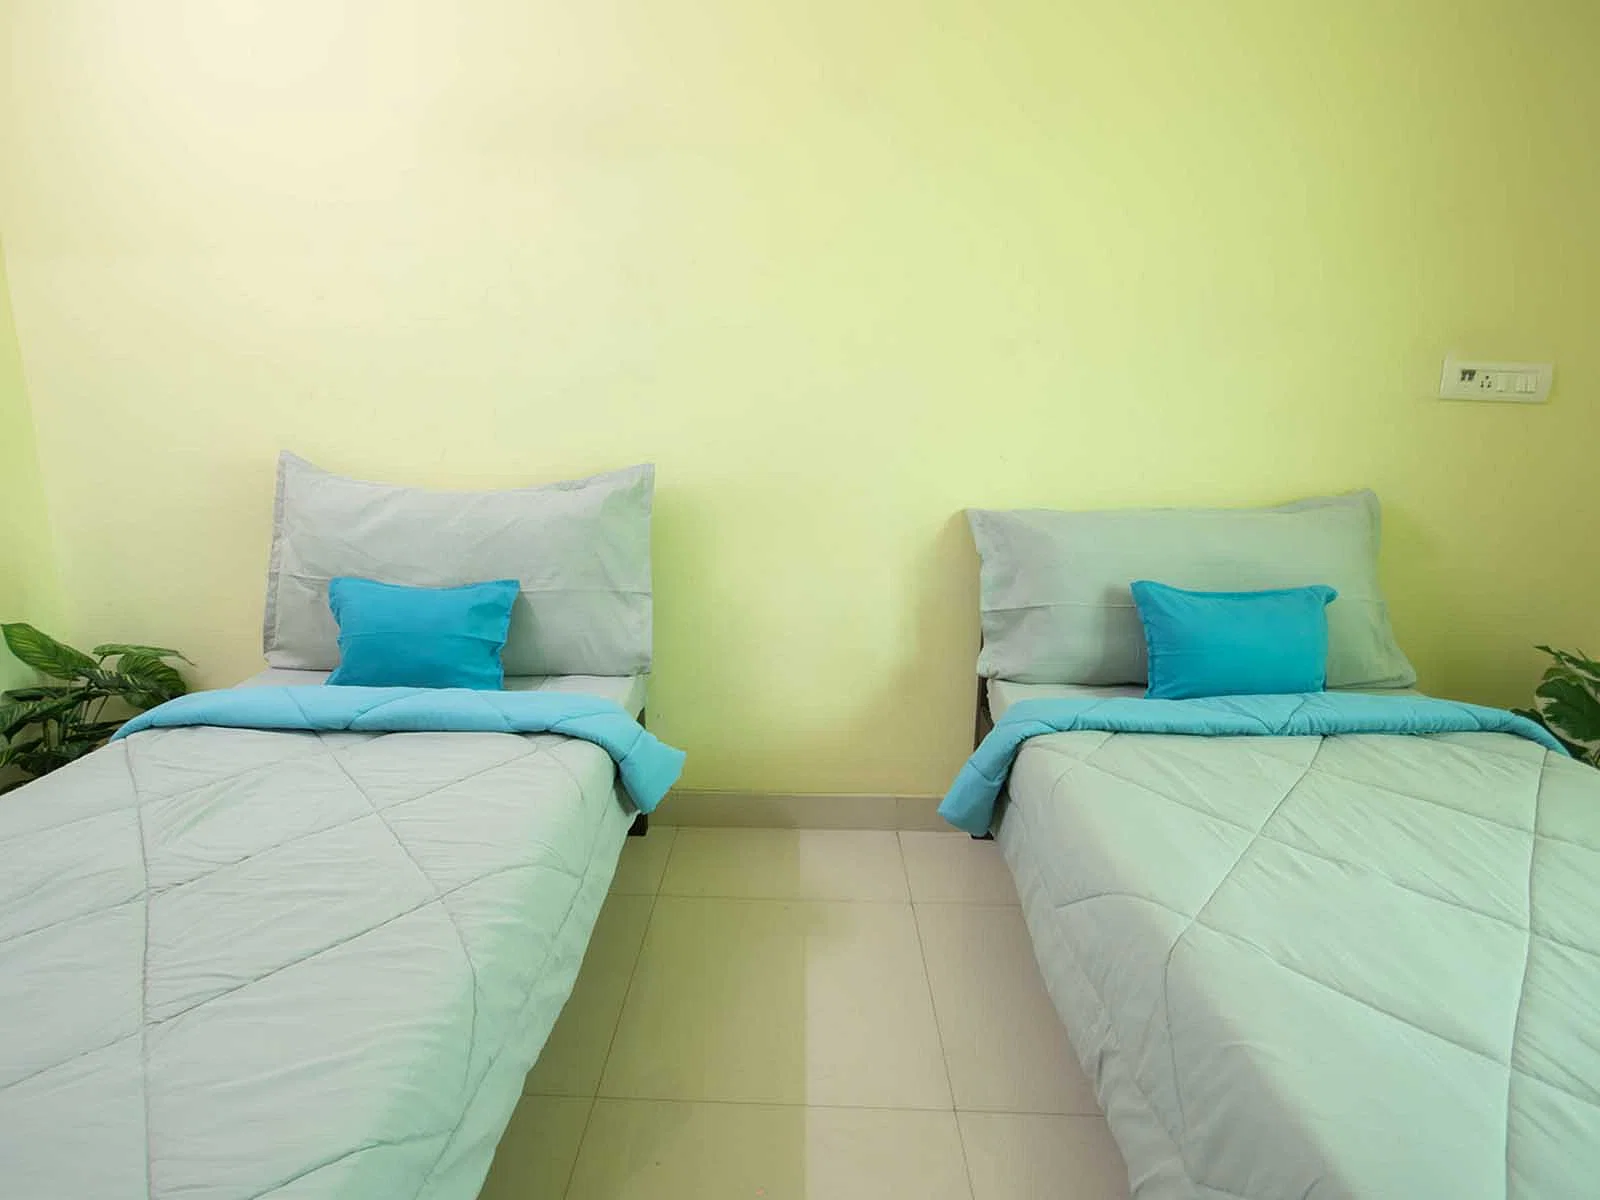 budget-friendly PGs and hostels for boys with single rooms with daily hopusekeeping-Zolo Cruze